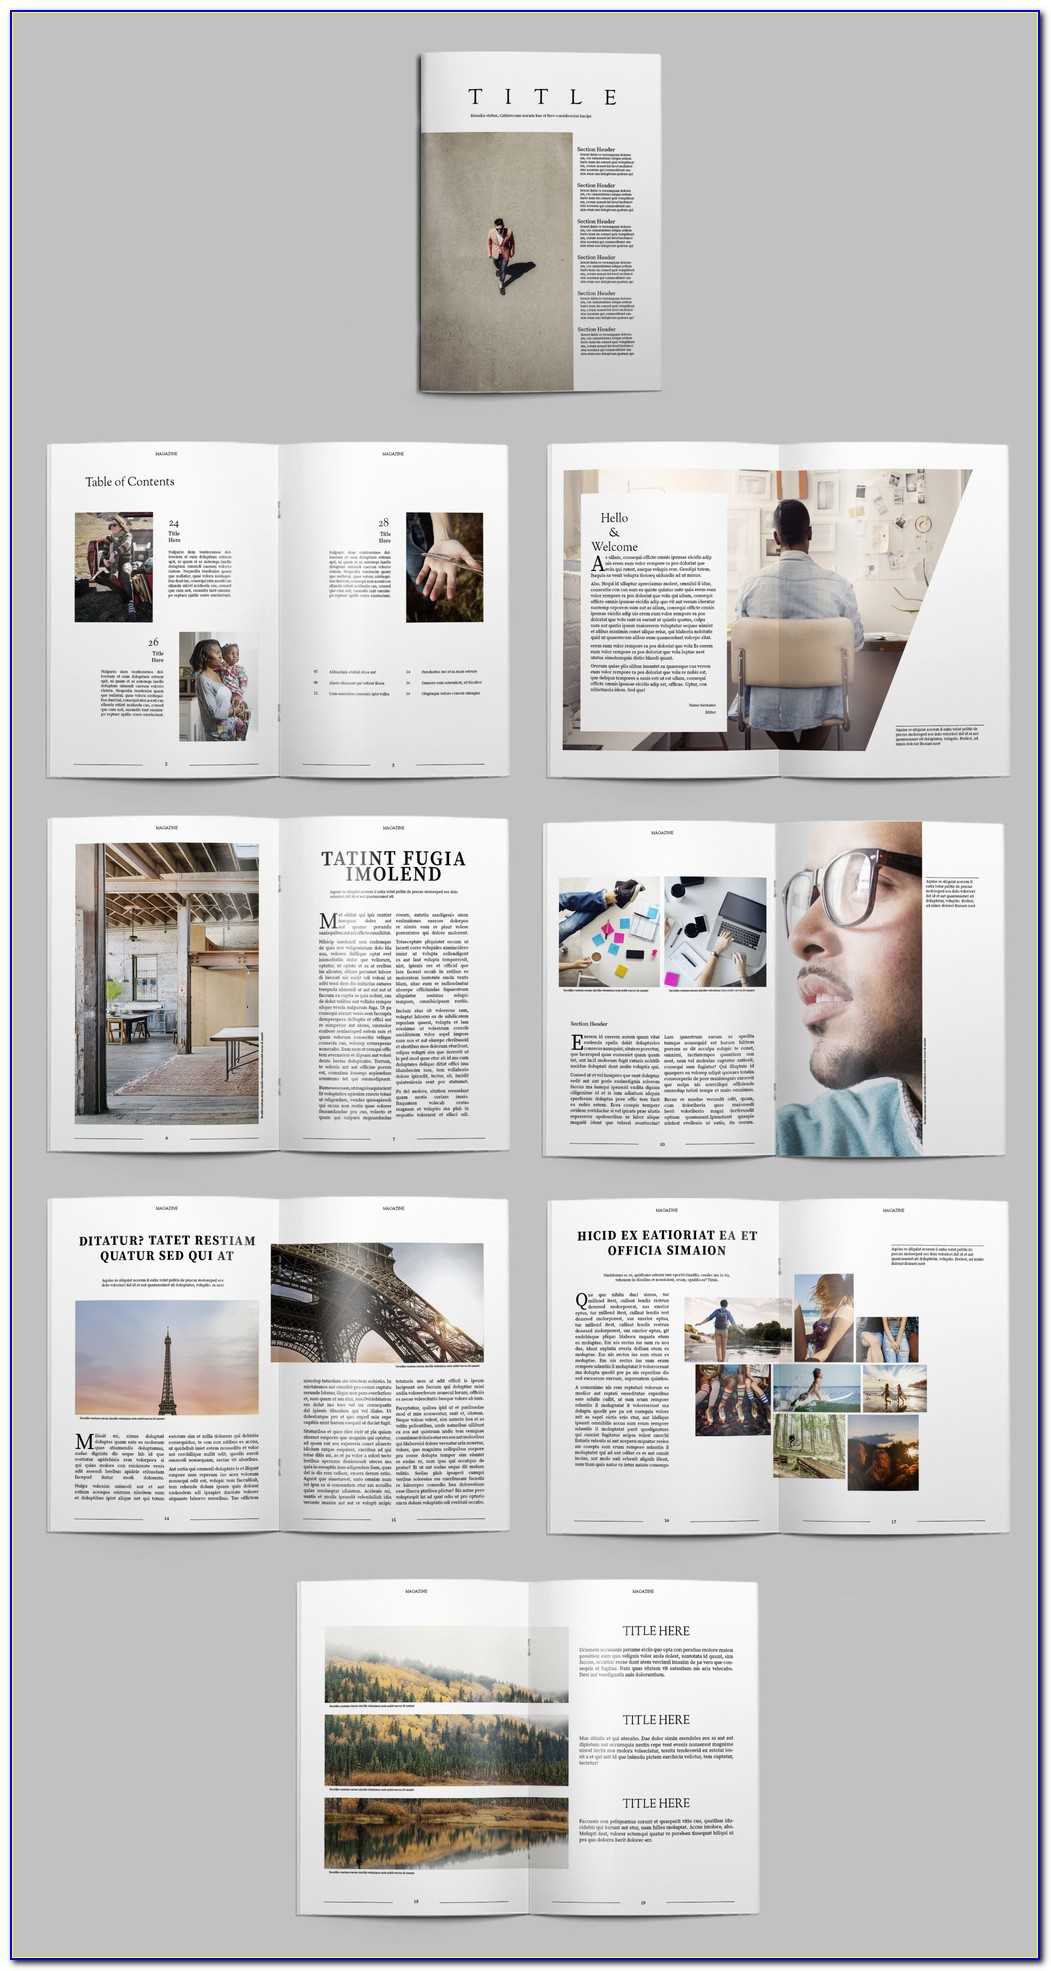 Download Free Indesign Templates Brochure With Indesign Templates Free Download Brochure